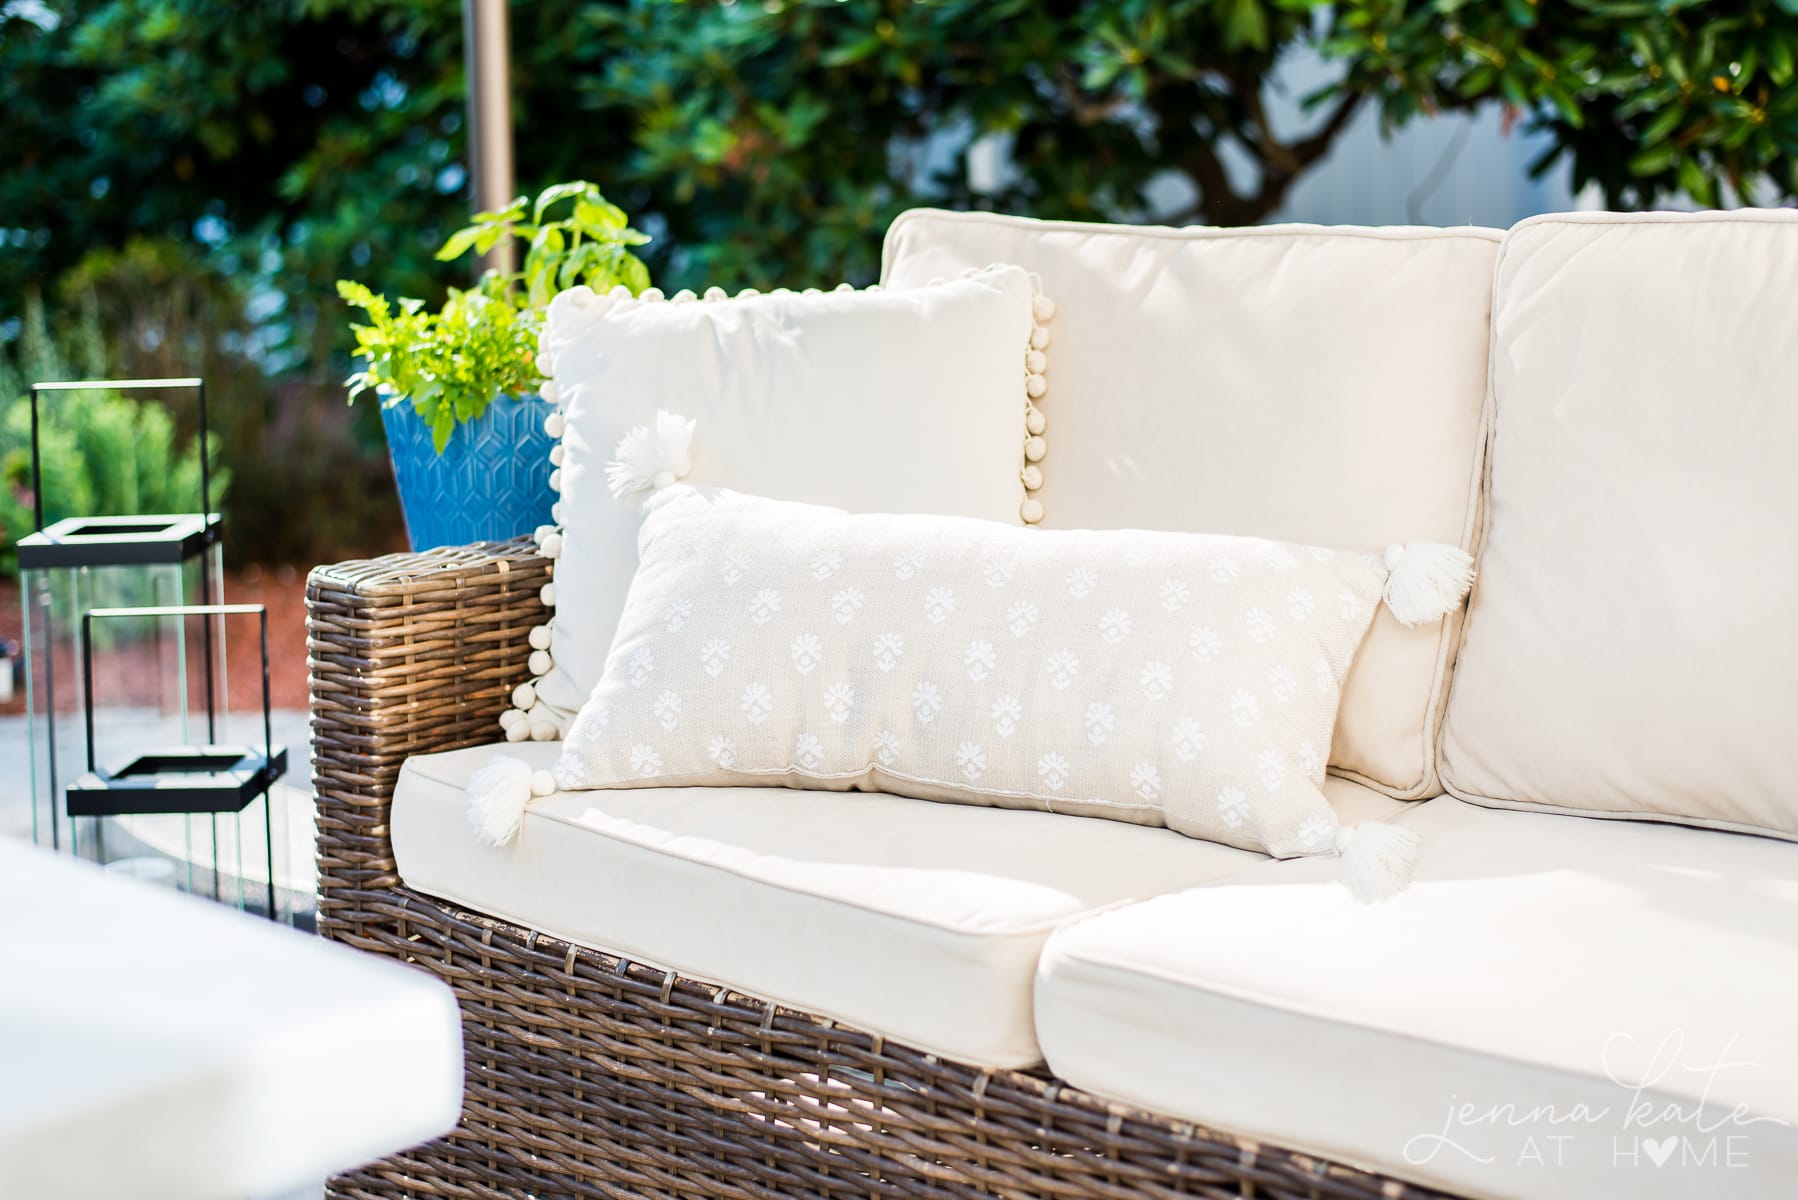 How To Clean Outdoor Cushions Jenna, How Do You Clean Outdoor Cushions Without Removable Covers